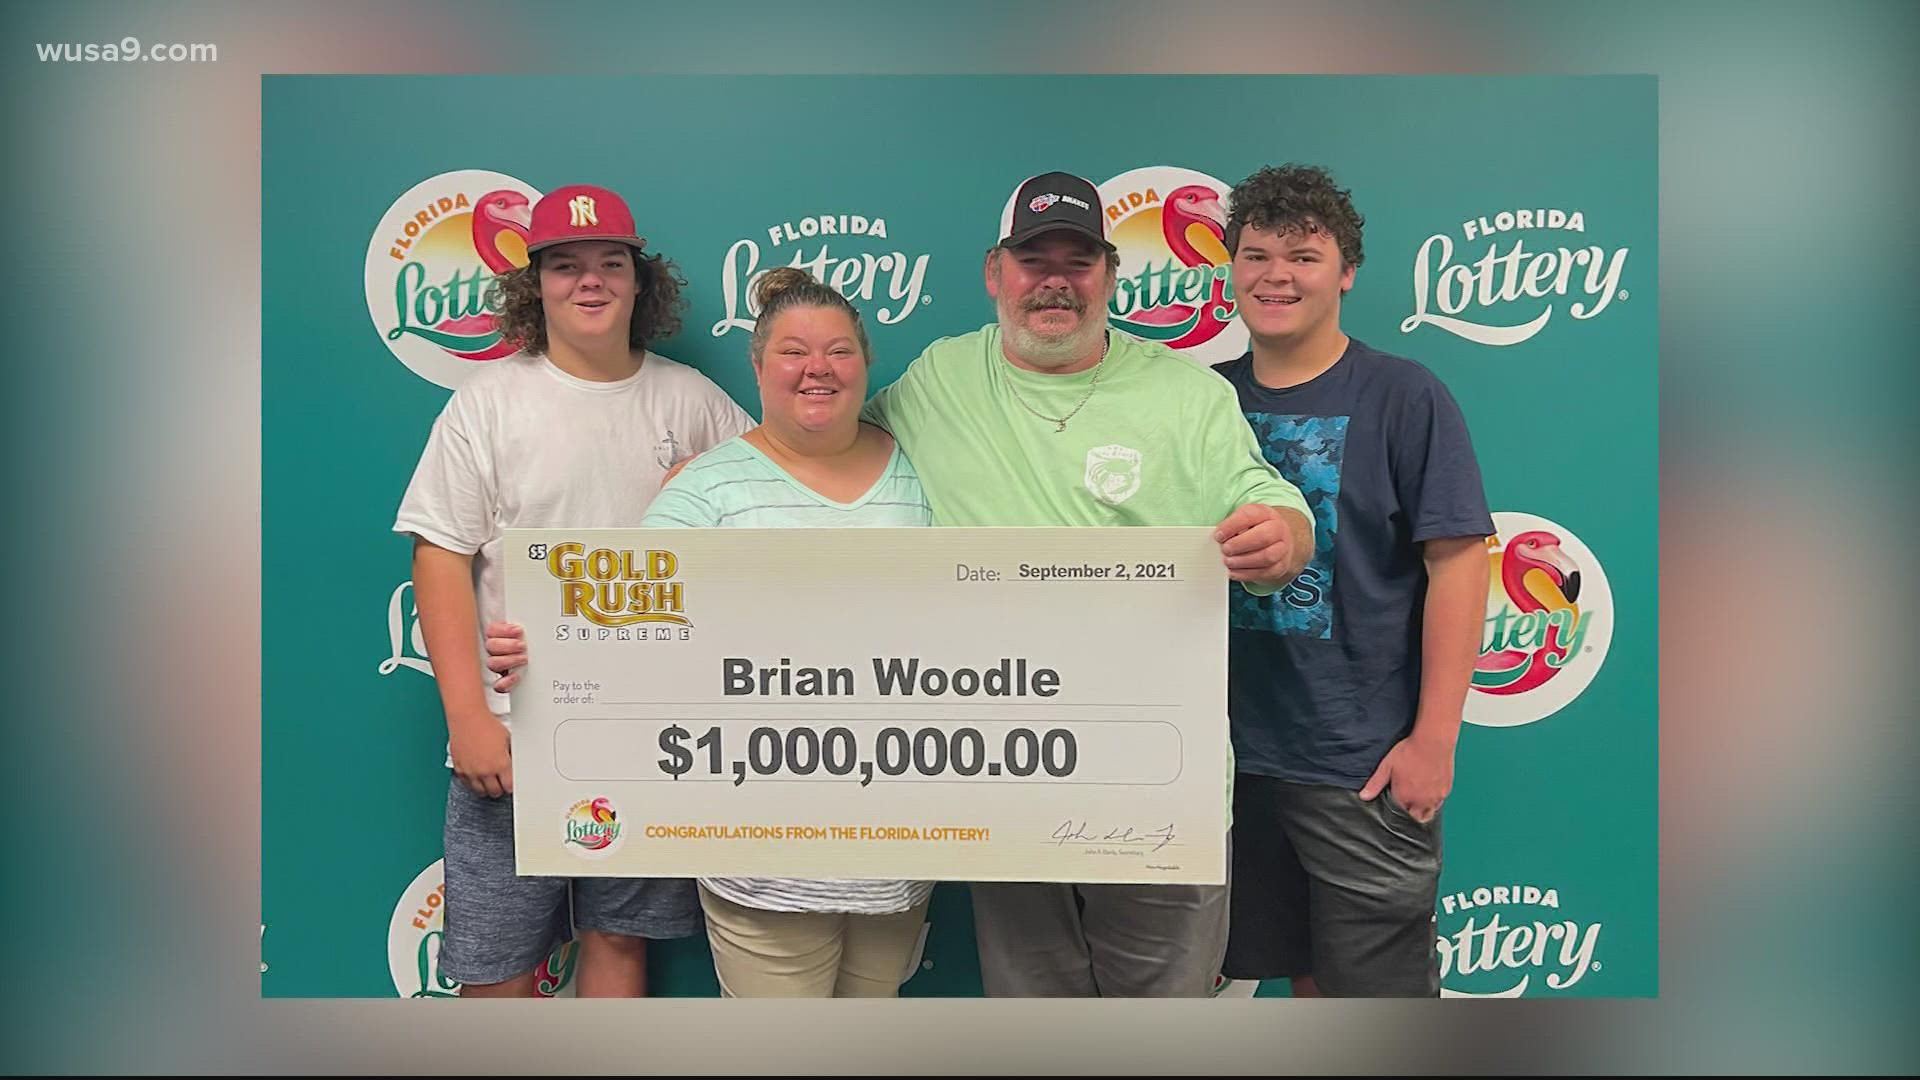 Sam Woodle achieved his dream of opening a repair shop, then he won the lottery!